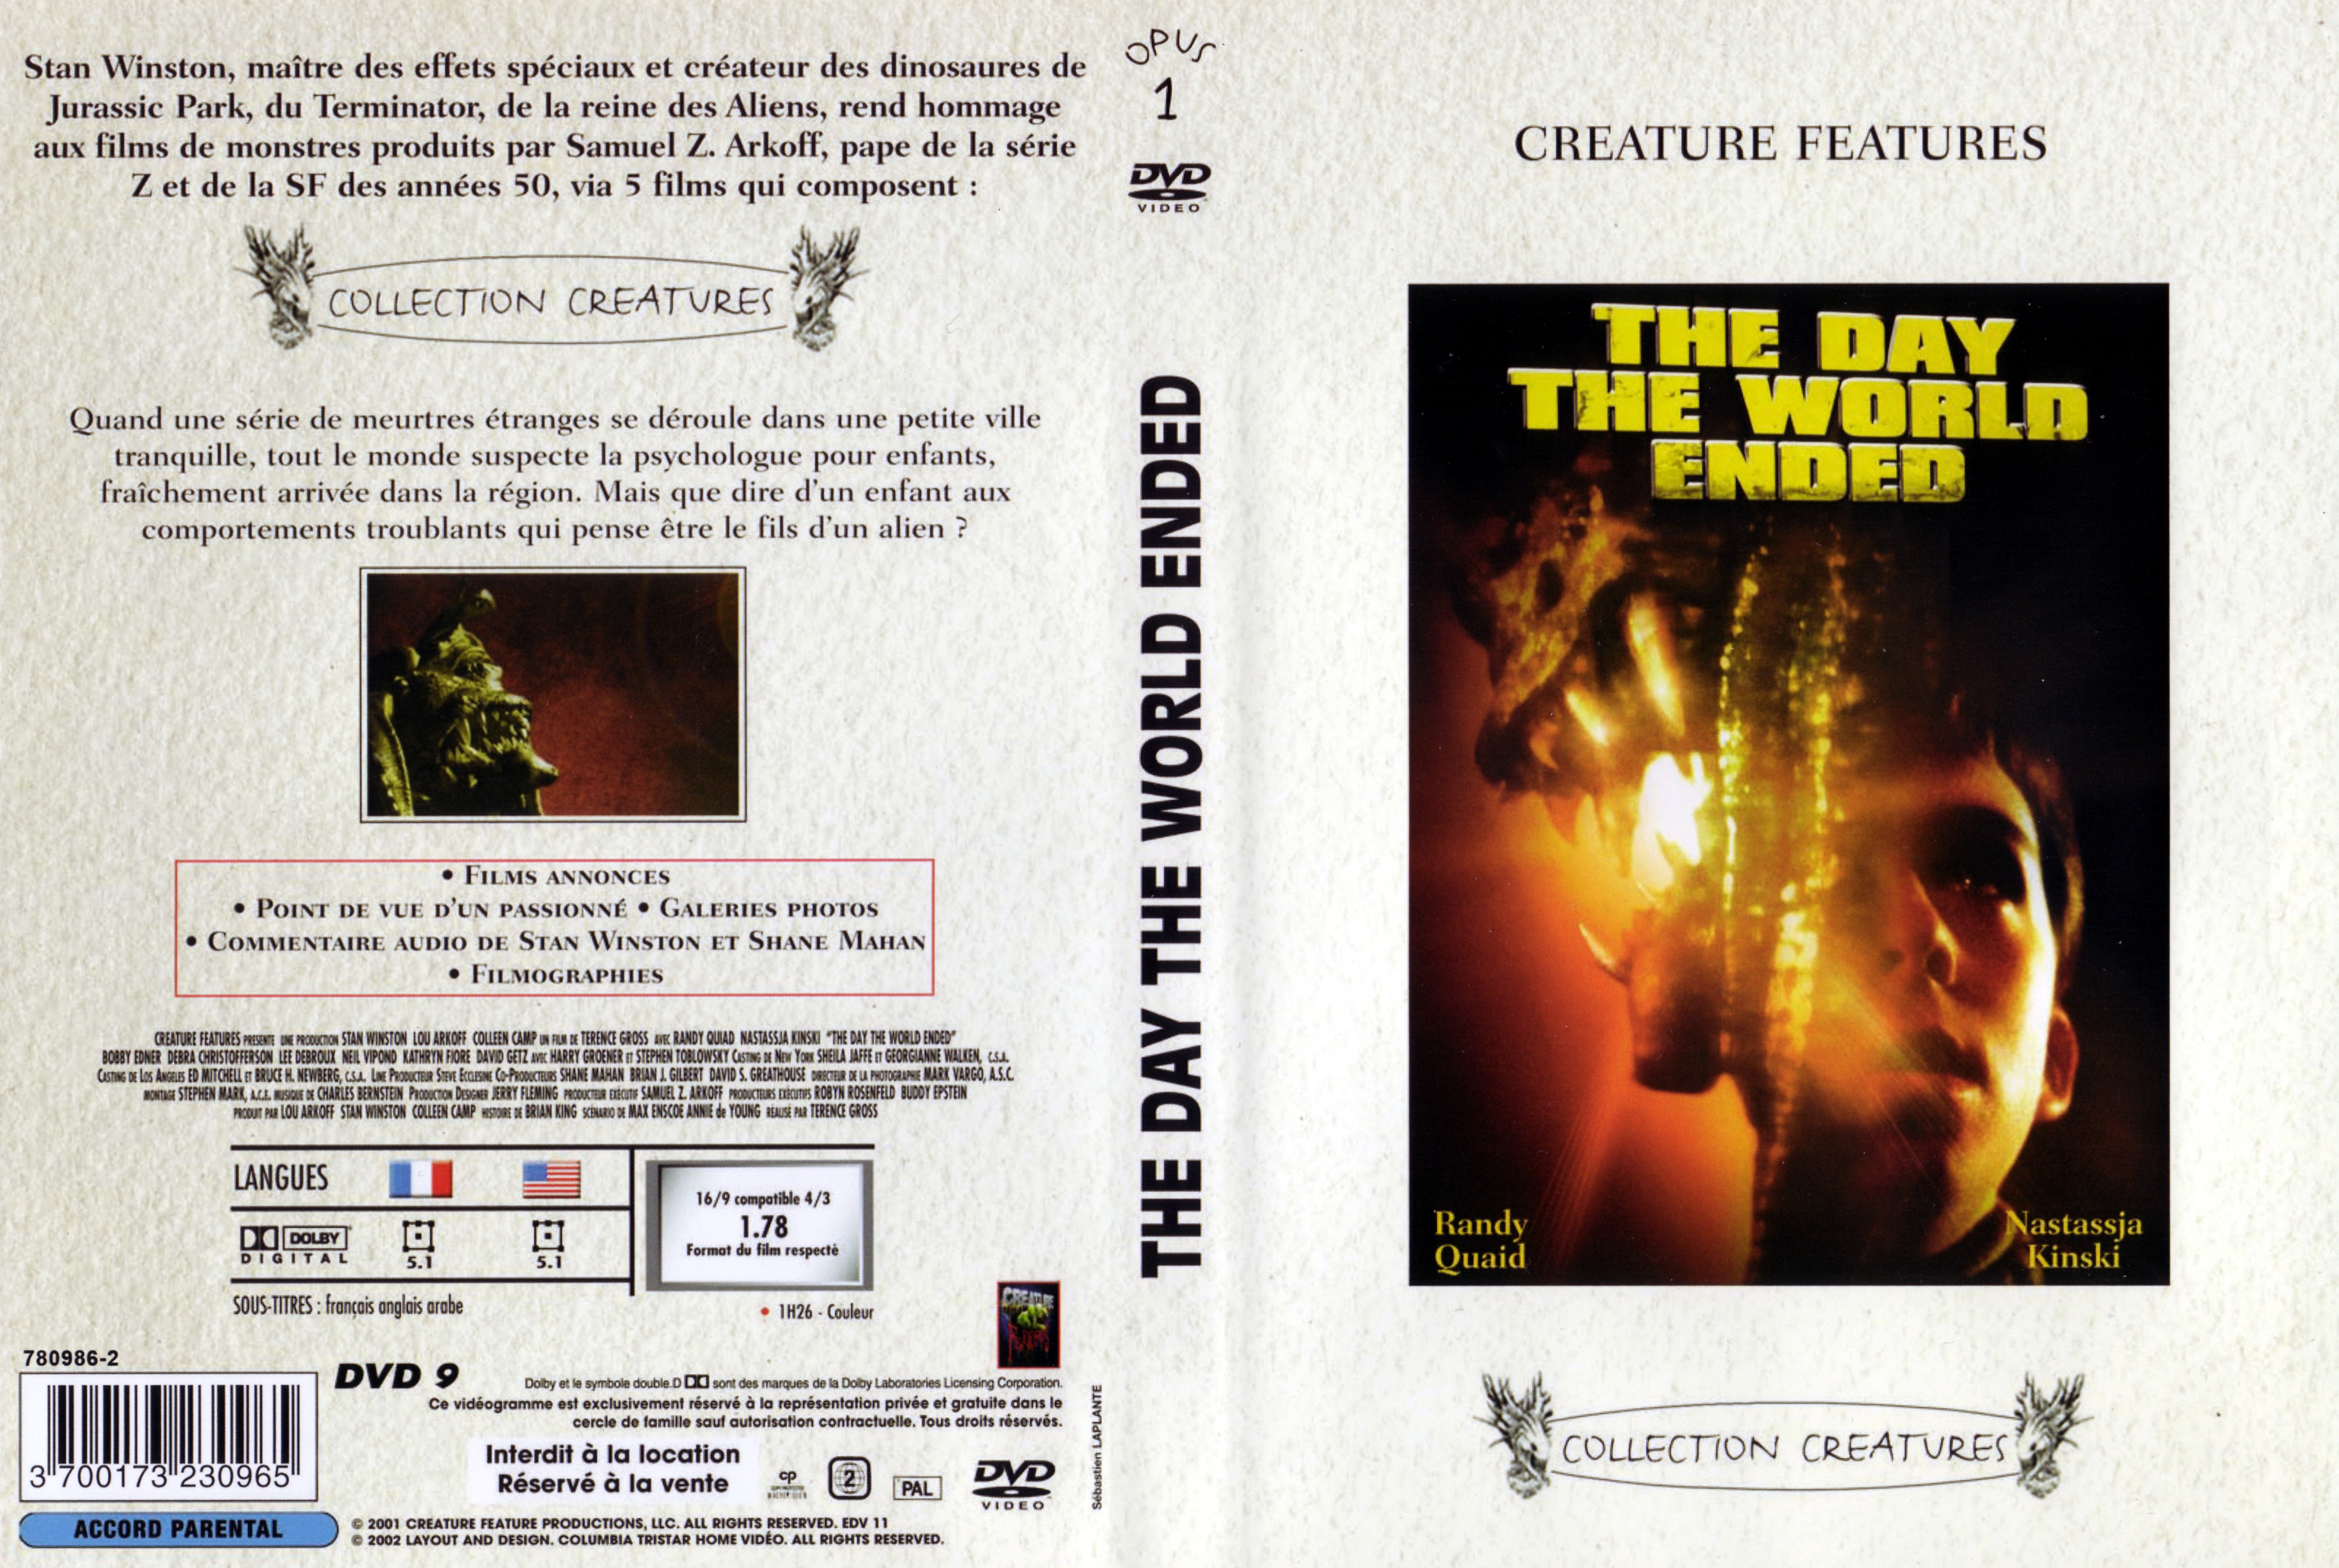 Jaquette DVD The day the world ended v2